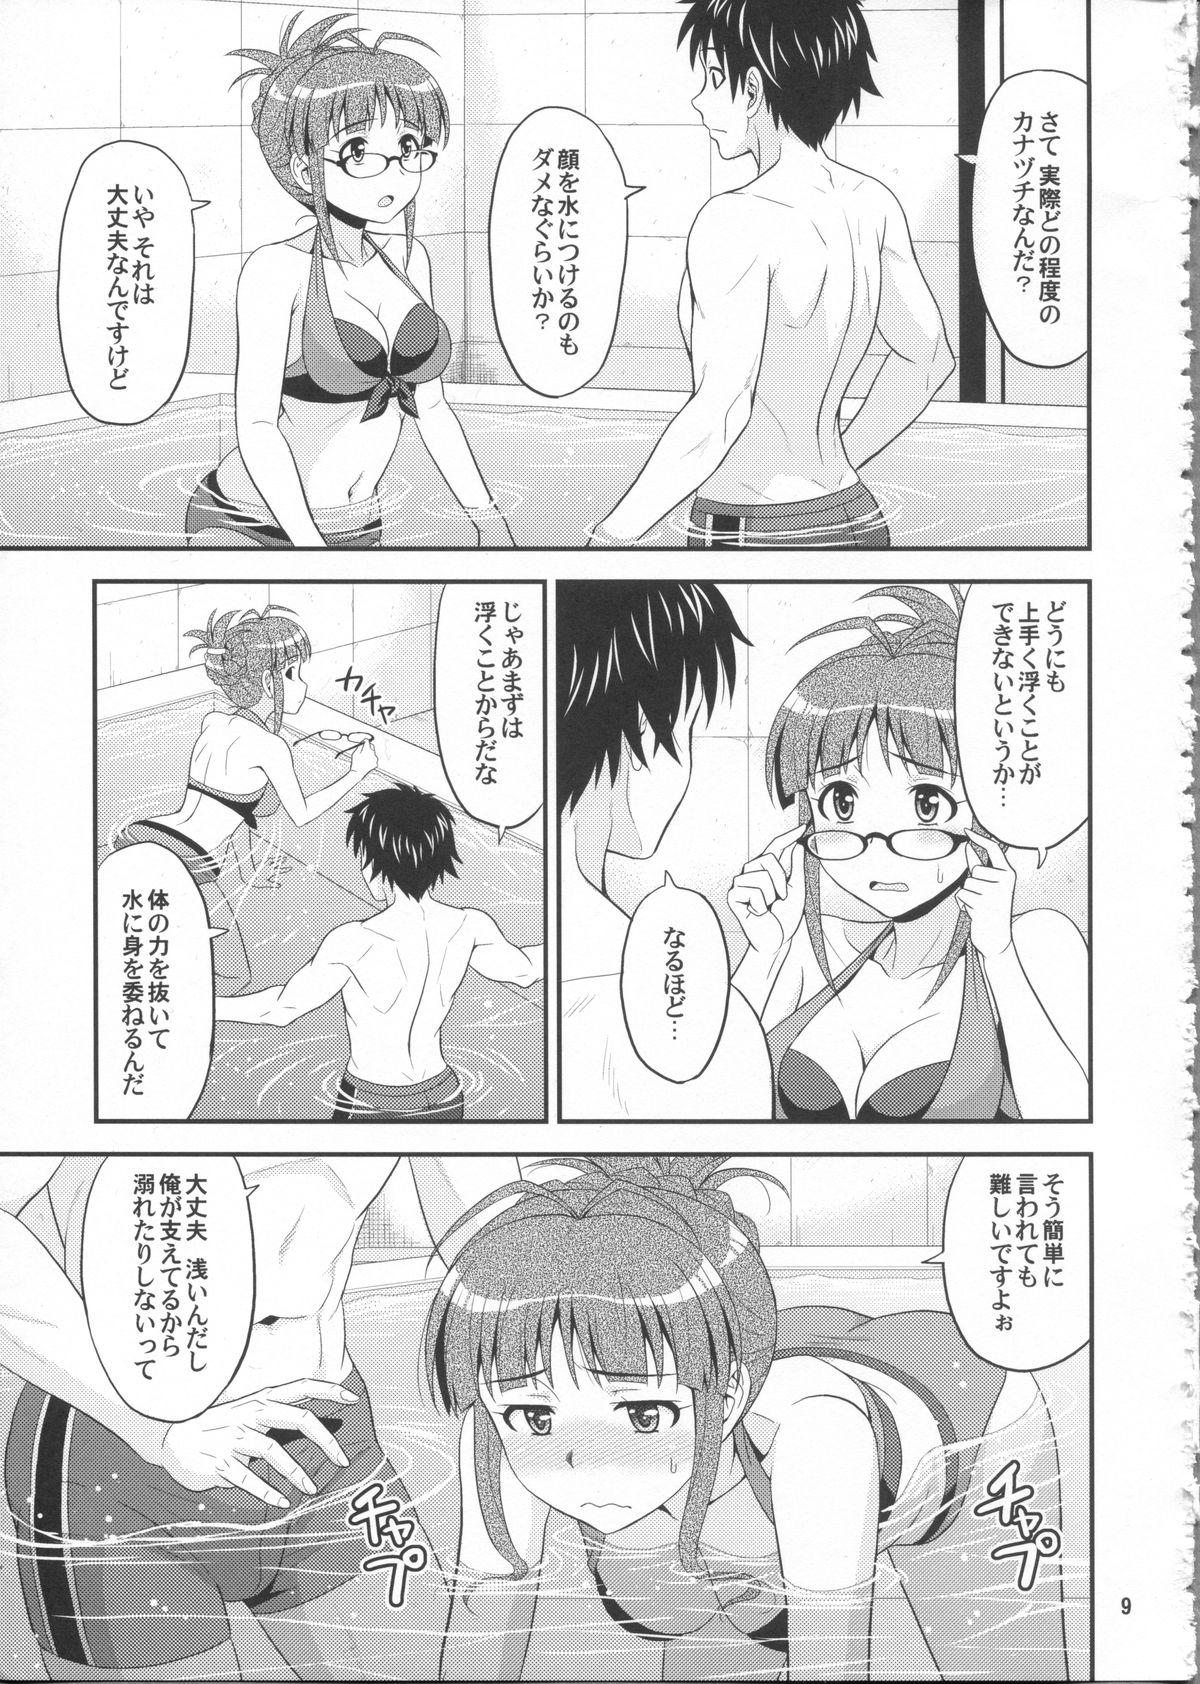 Loira Training for You! - The idolmaster Sluts - Page 9